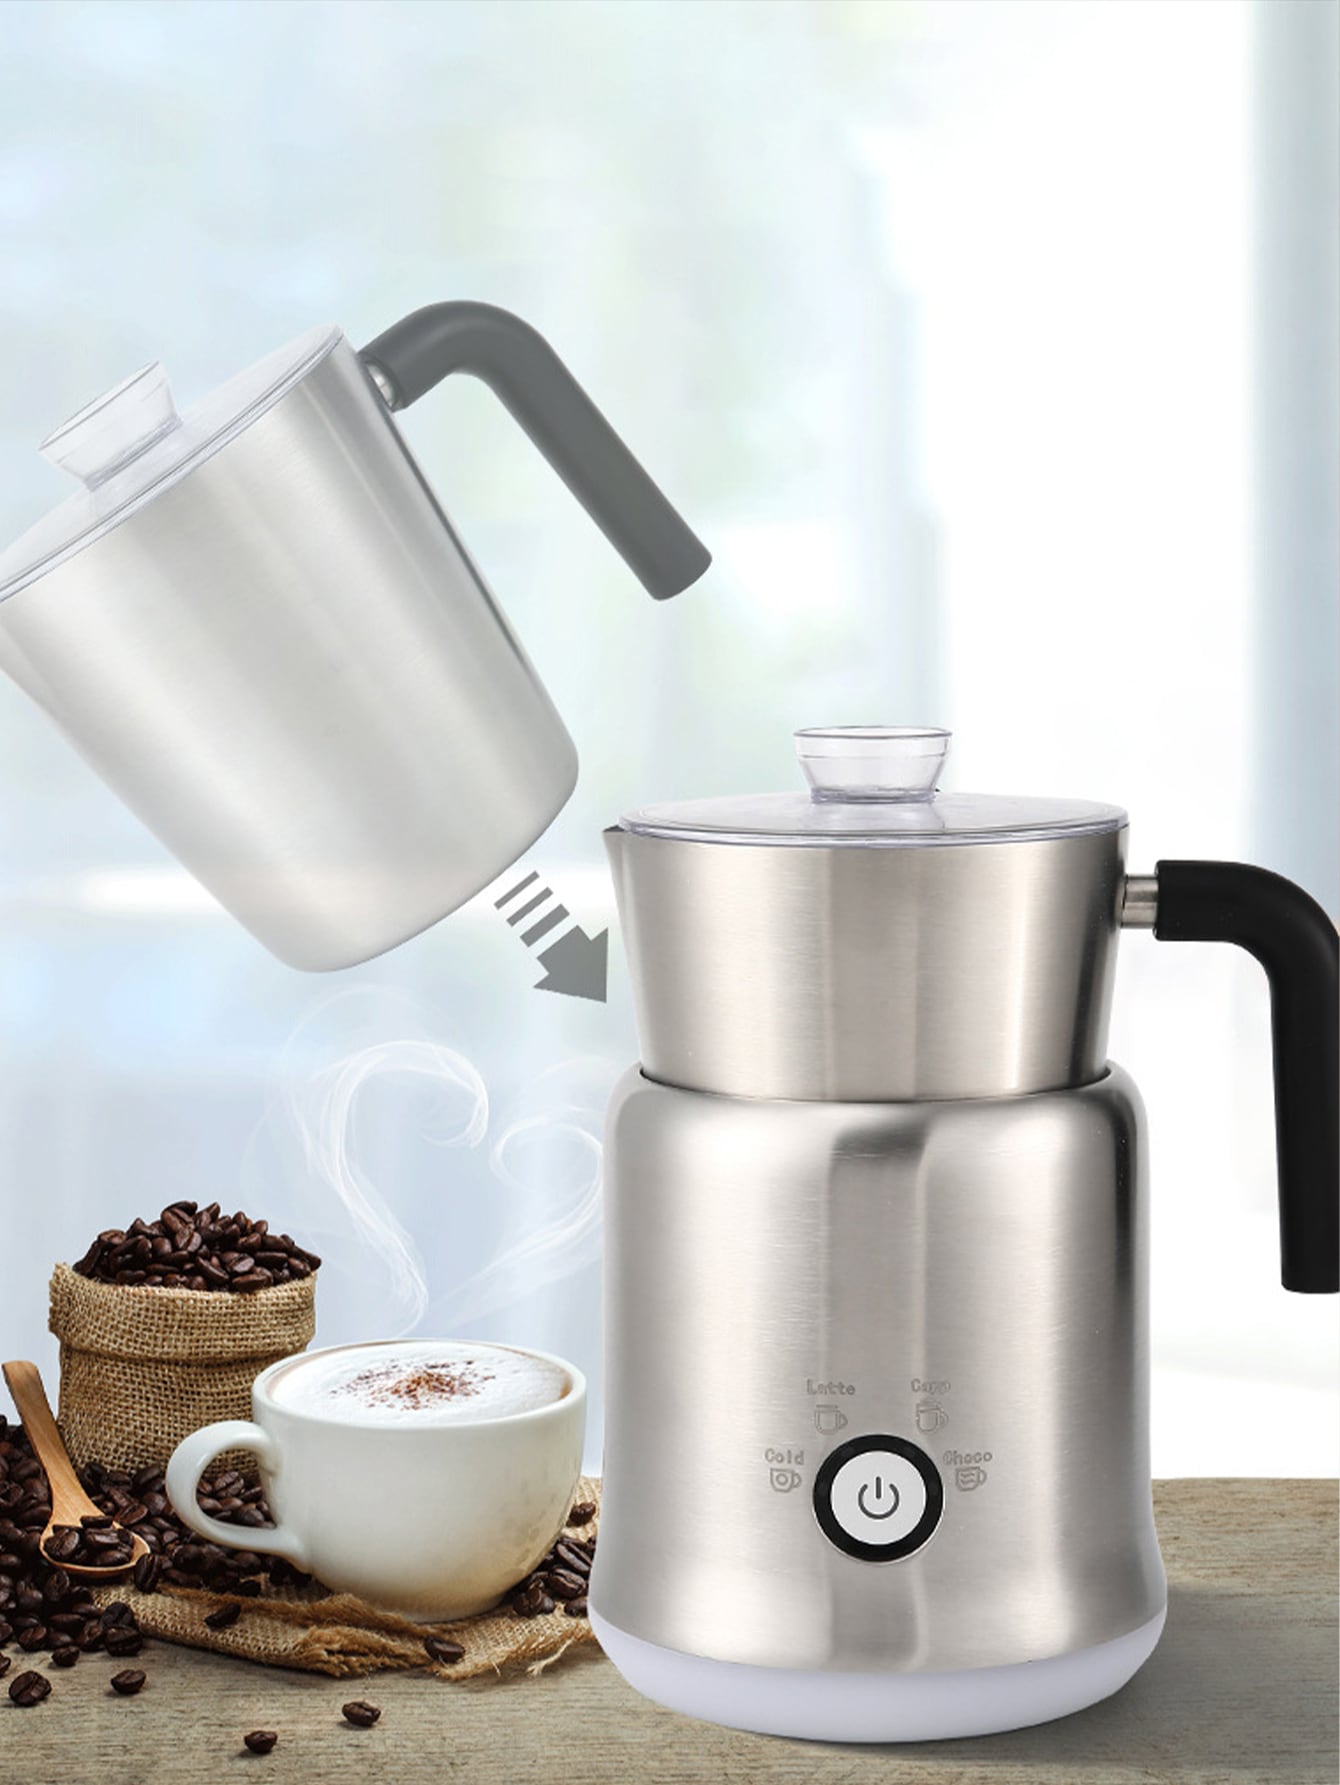 1pc Electric Milk Frother With Big Capacity, Stainless Steel Milk Frother For Coffee & Latte Art, Suitable For Home Use-Silver-2